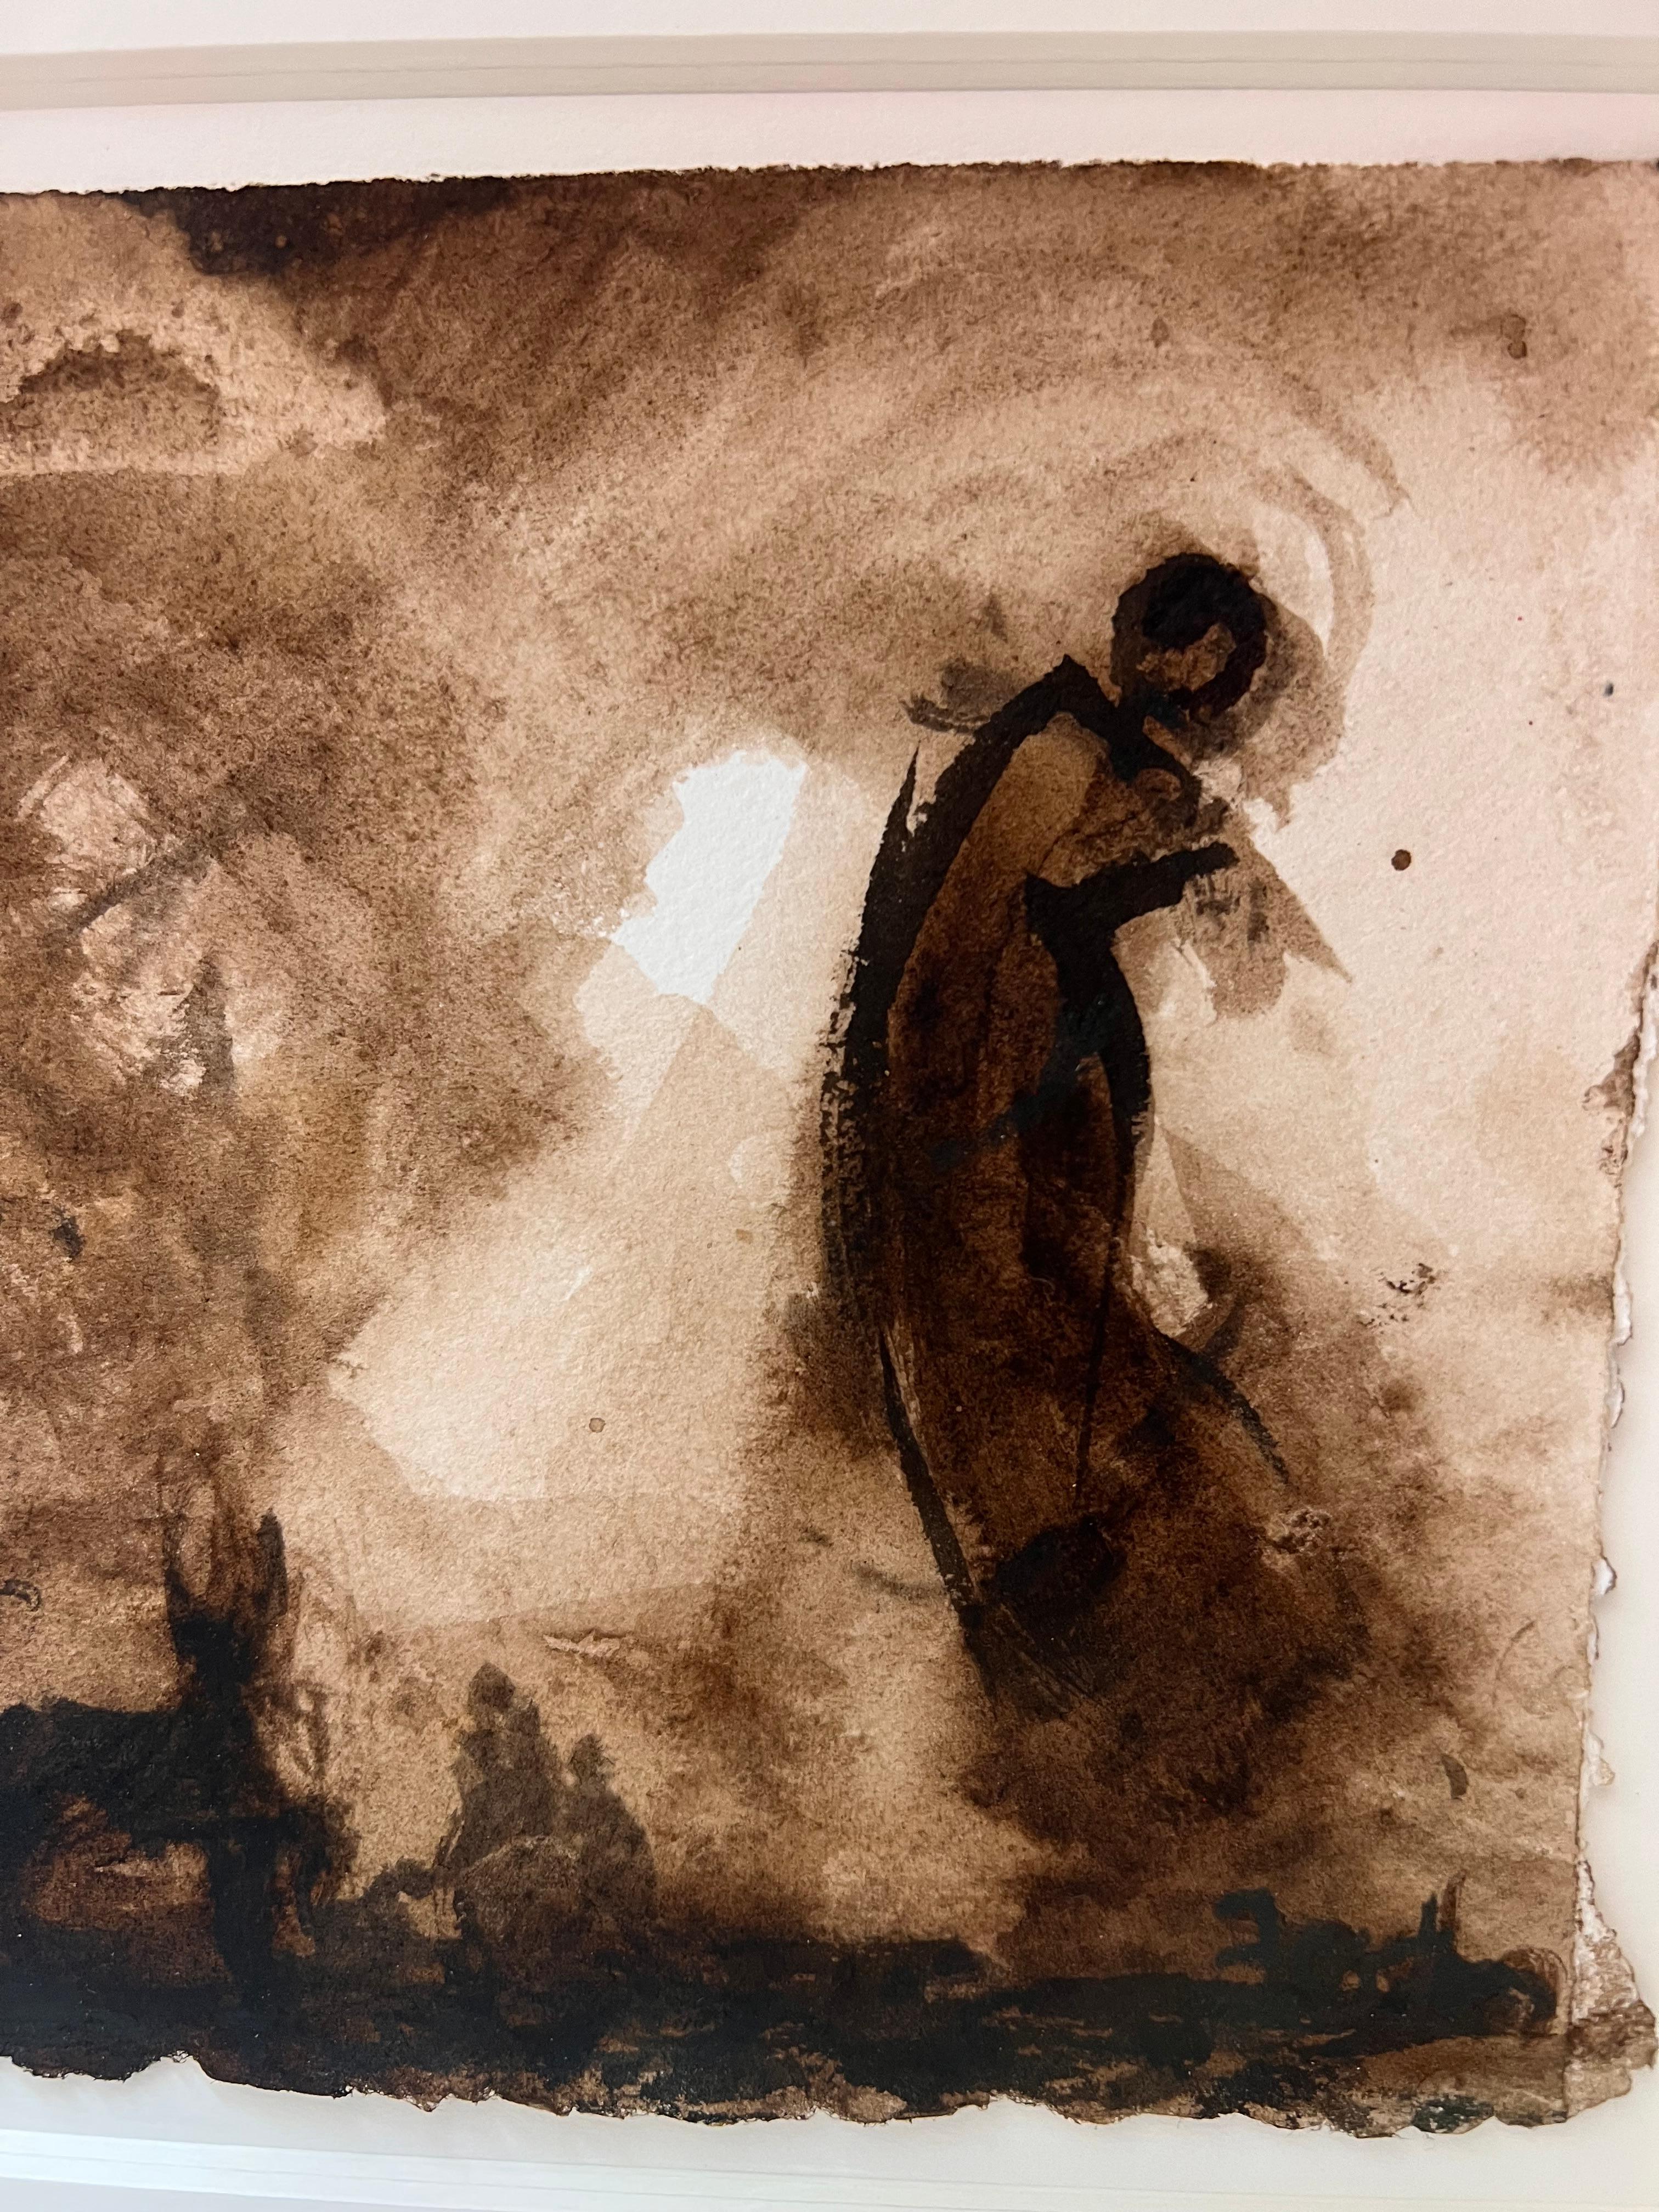 This sepia ink drawing is in excellent condition and has only been shown in a gallery setting. Gail Foster is an Atlanta-based artist whose work is often exhibited in the Atlanta area. Foster’s work is motivated by an impassioned view of the human